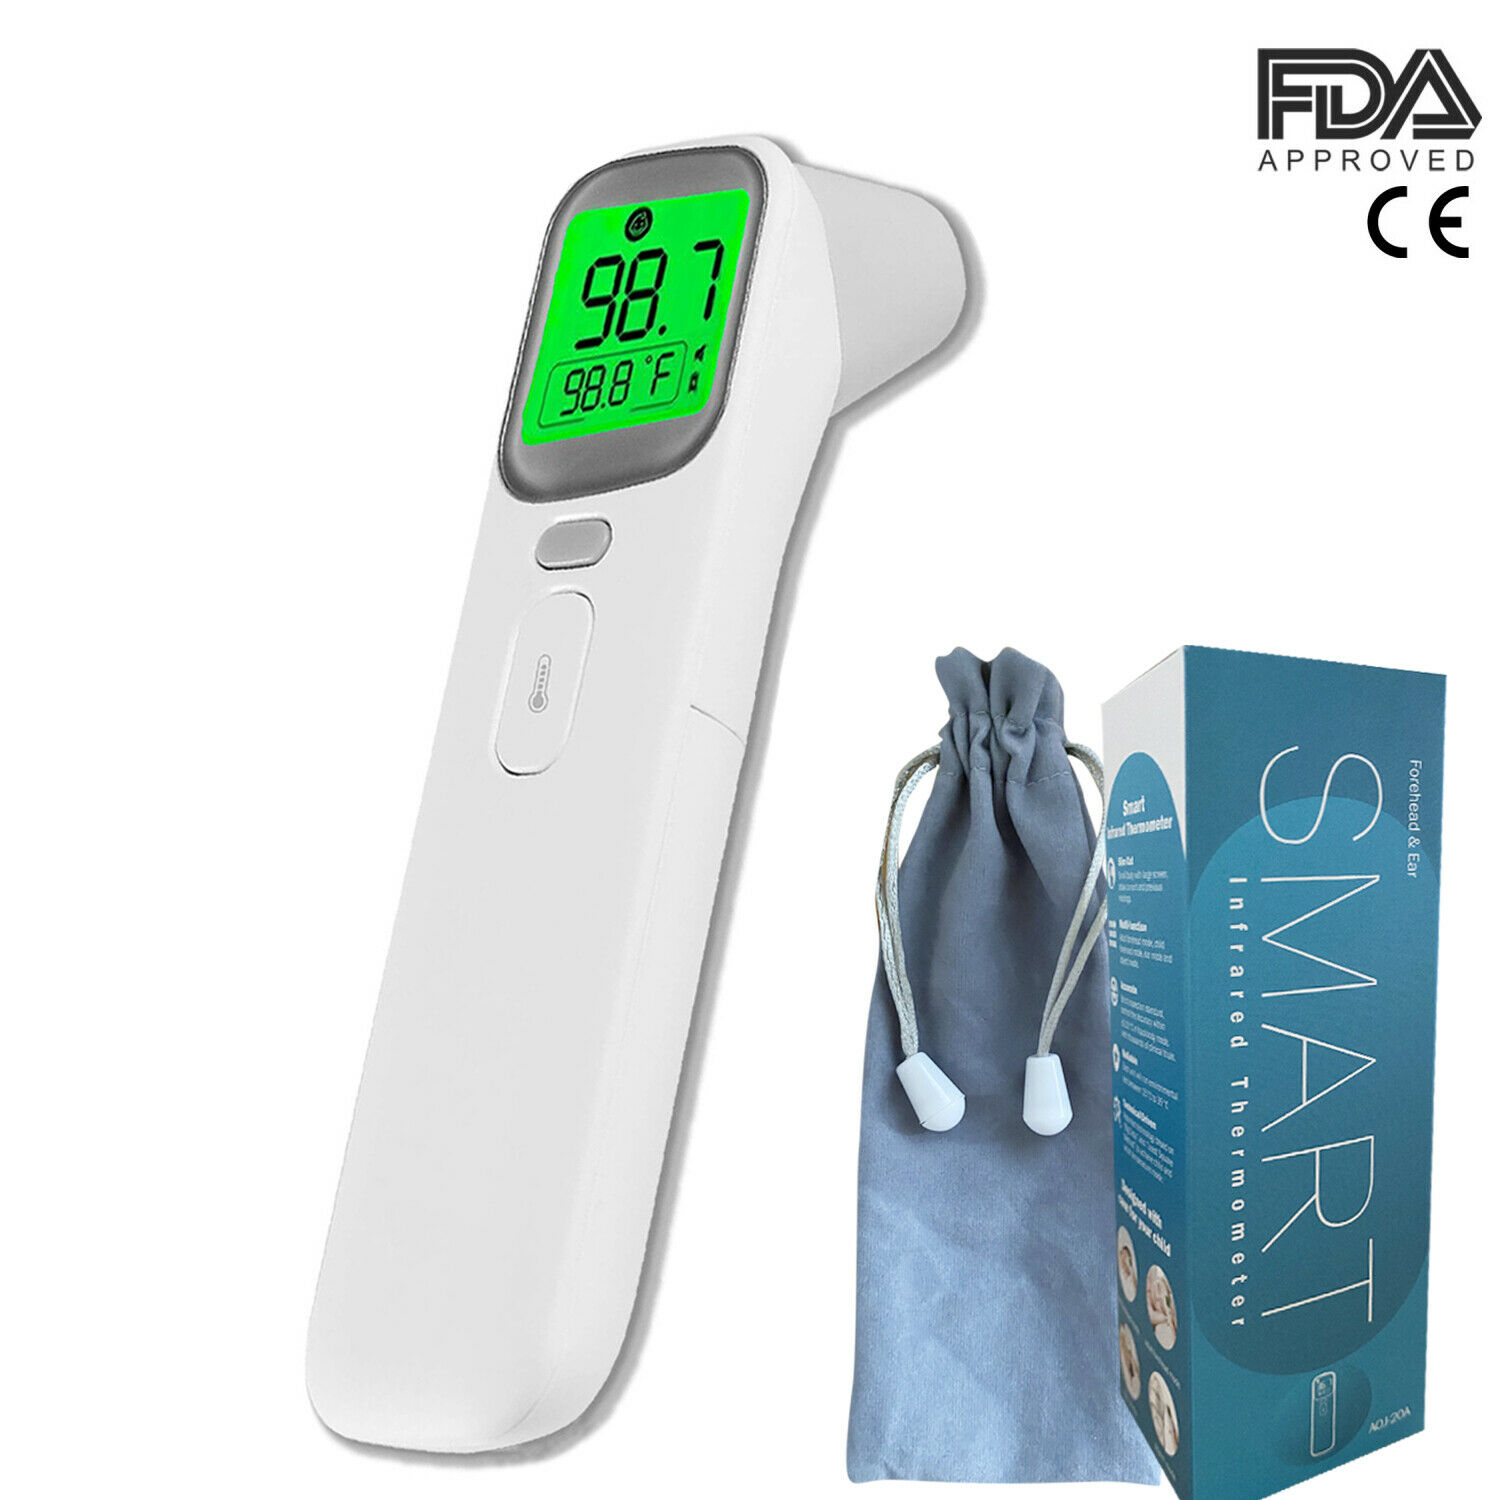 Medical Grade Non-contact Infrared Forehead Thermometer Baby/adult(fda Approved)